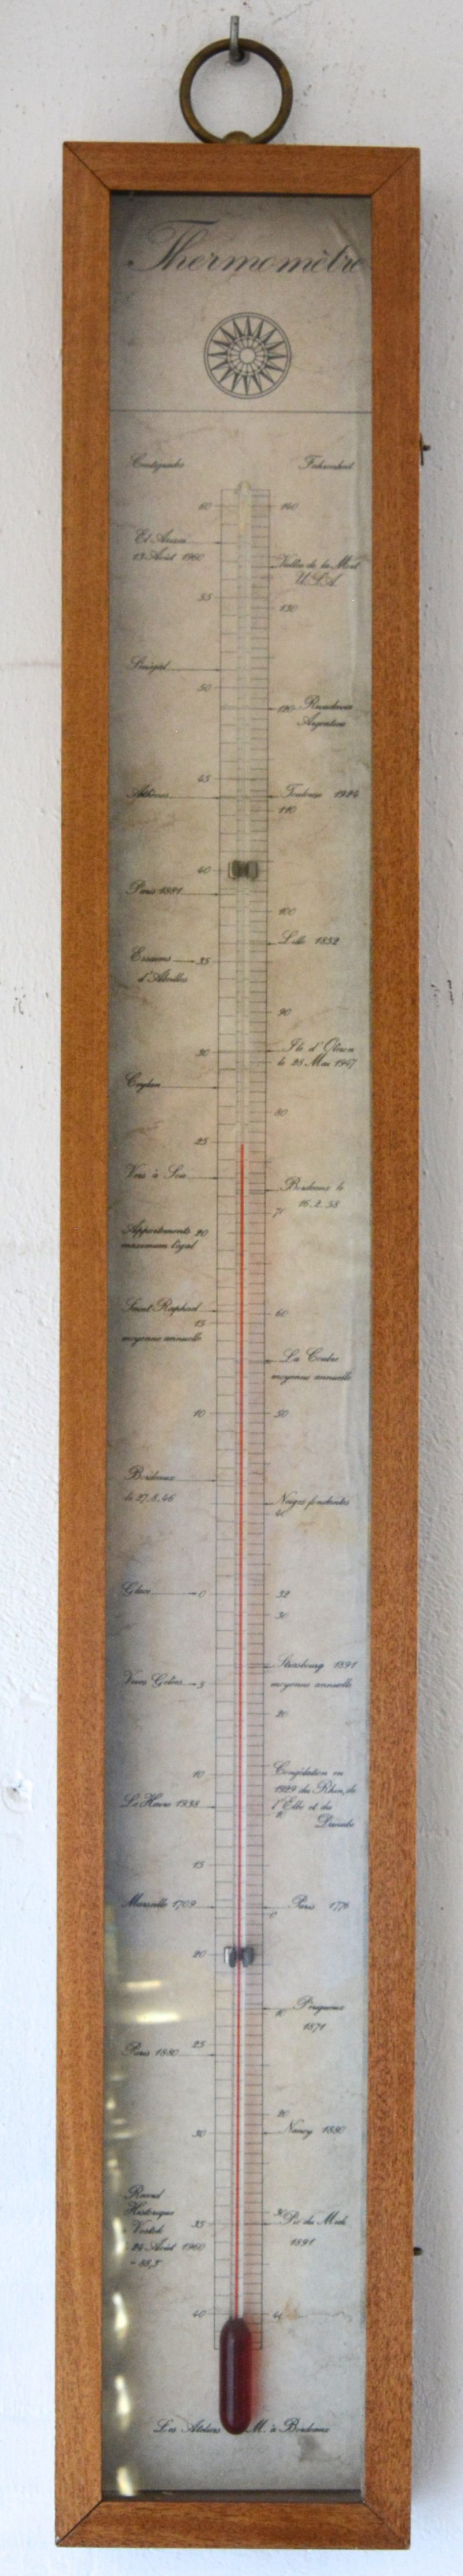 Een thermometer achter glas.